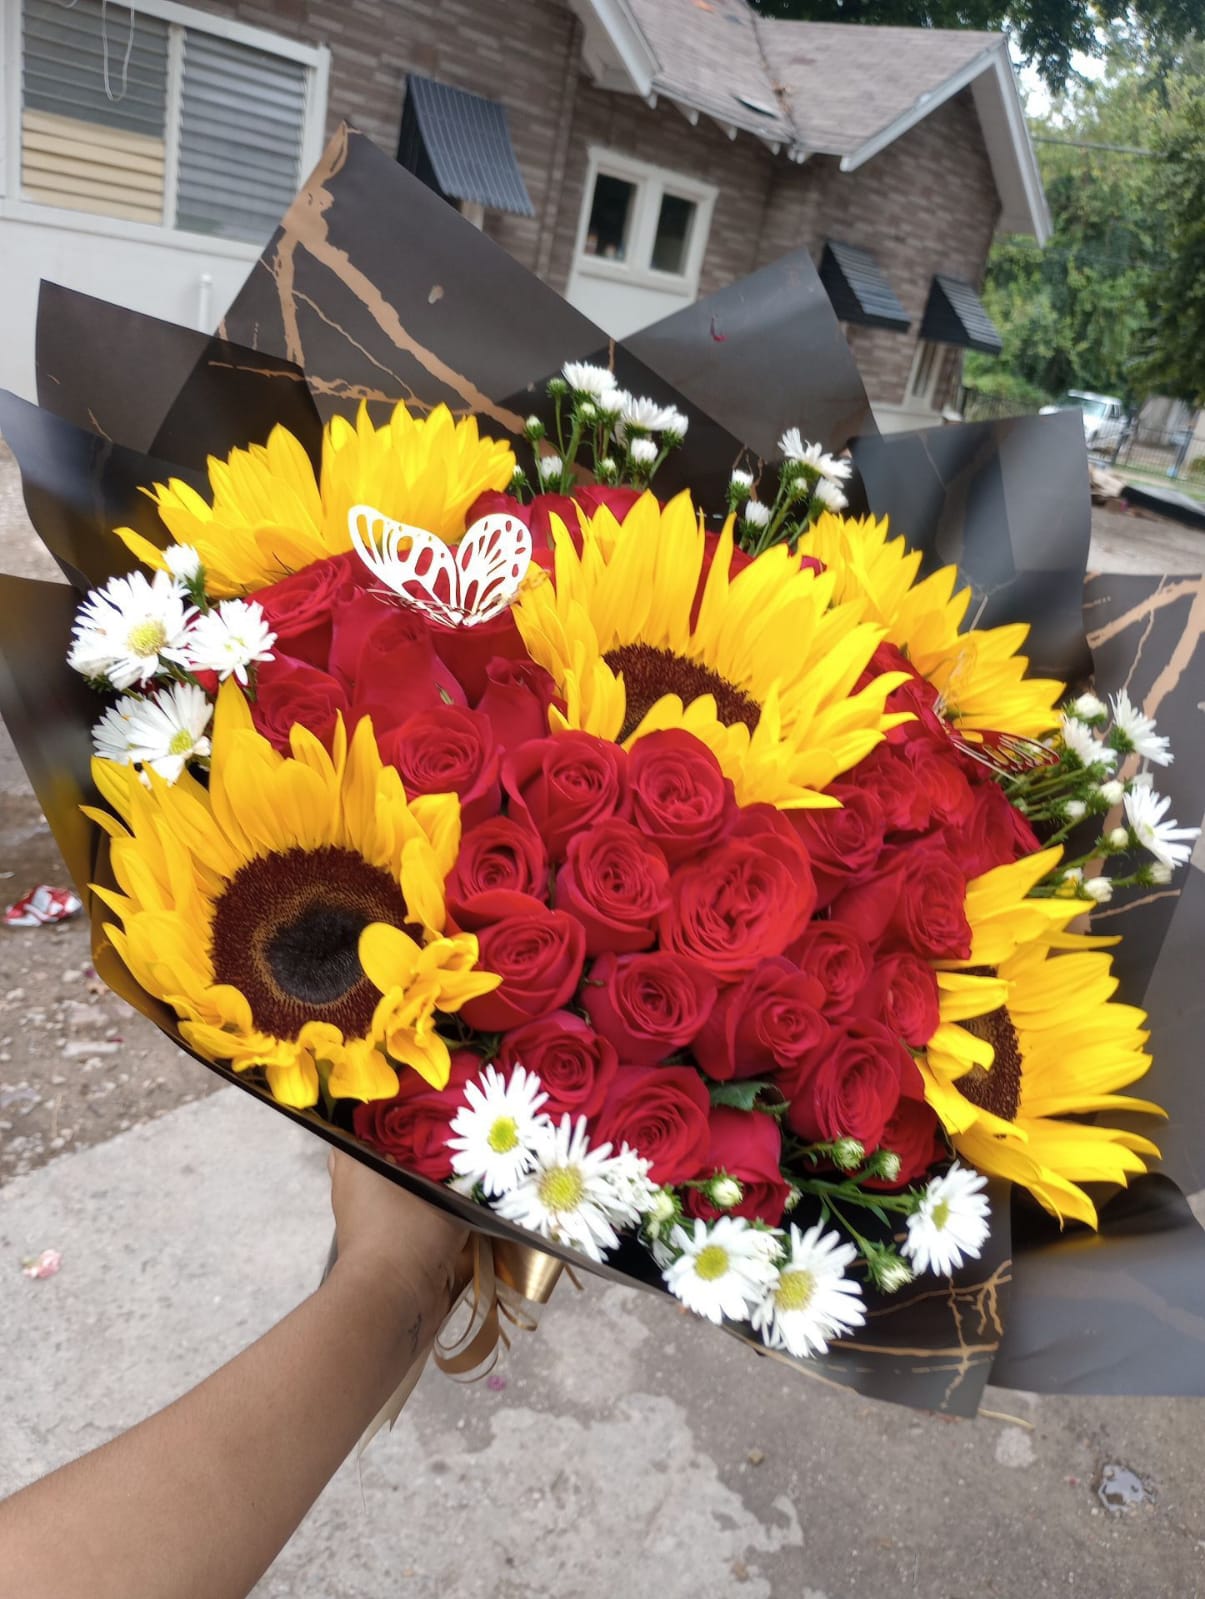 MEDIUM BOUQUET ROSES AND SUNFLOWERS 🌻🌹 50 ROSES AND 5 SUNFLOWERS